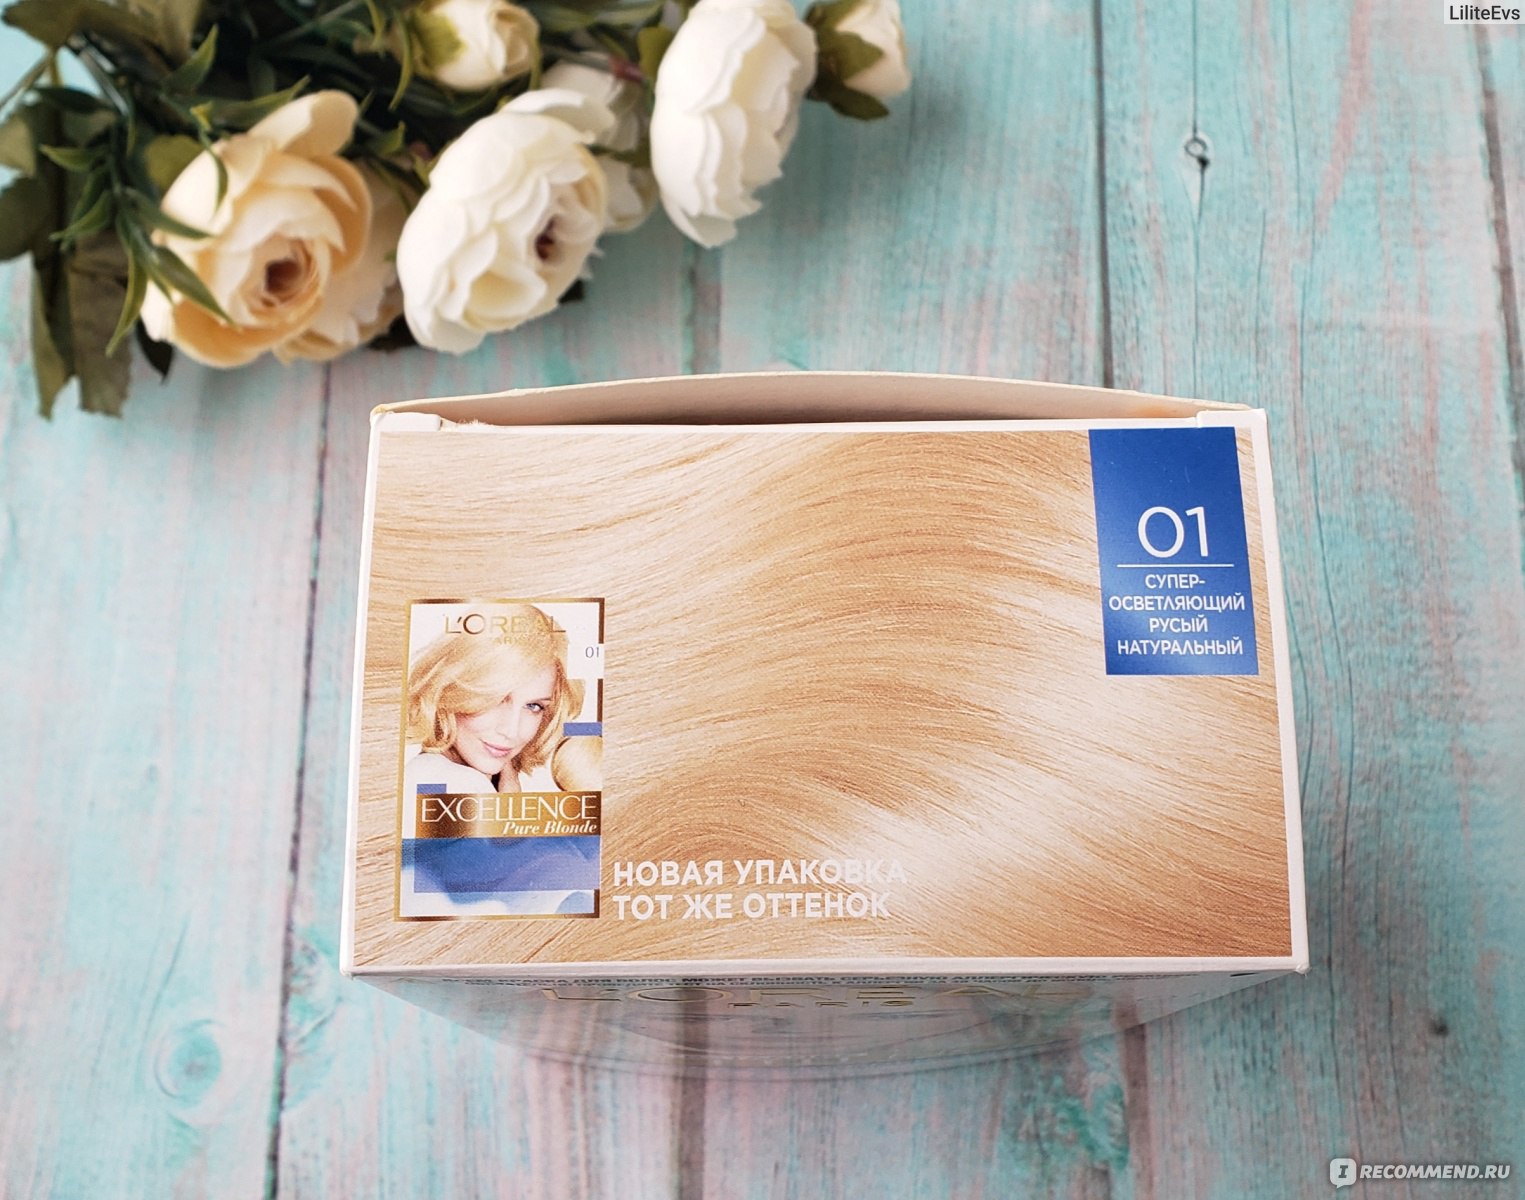 Blondes pure. Loreal Excellence Pure blonde 01. Лореаль 01 супер осветляющий. Краска Loreal Excellence Pure blond. Лореаль экселанс Pure blonde.